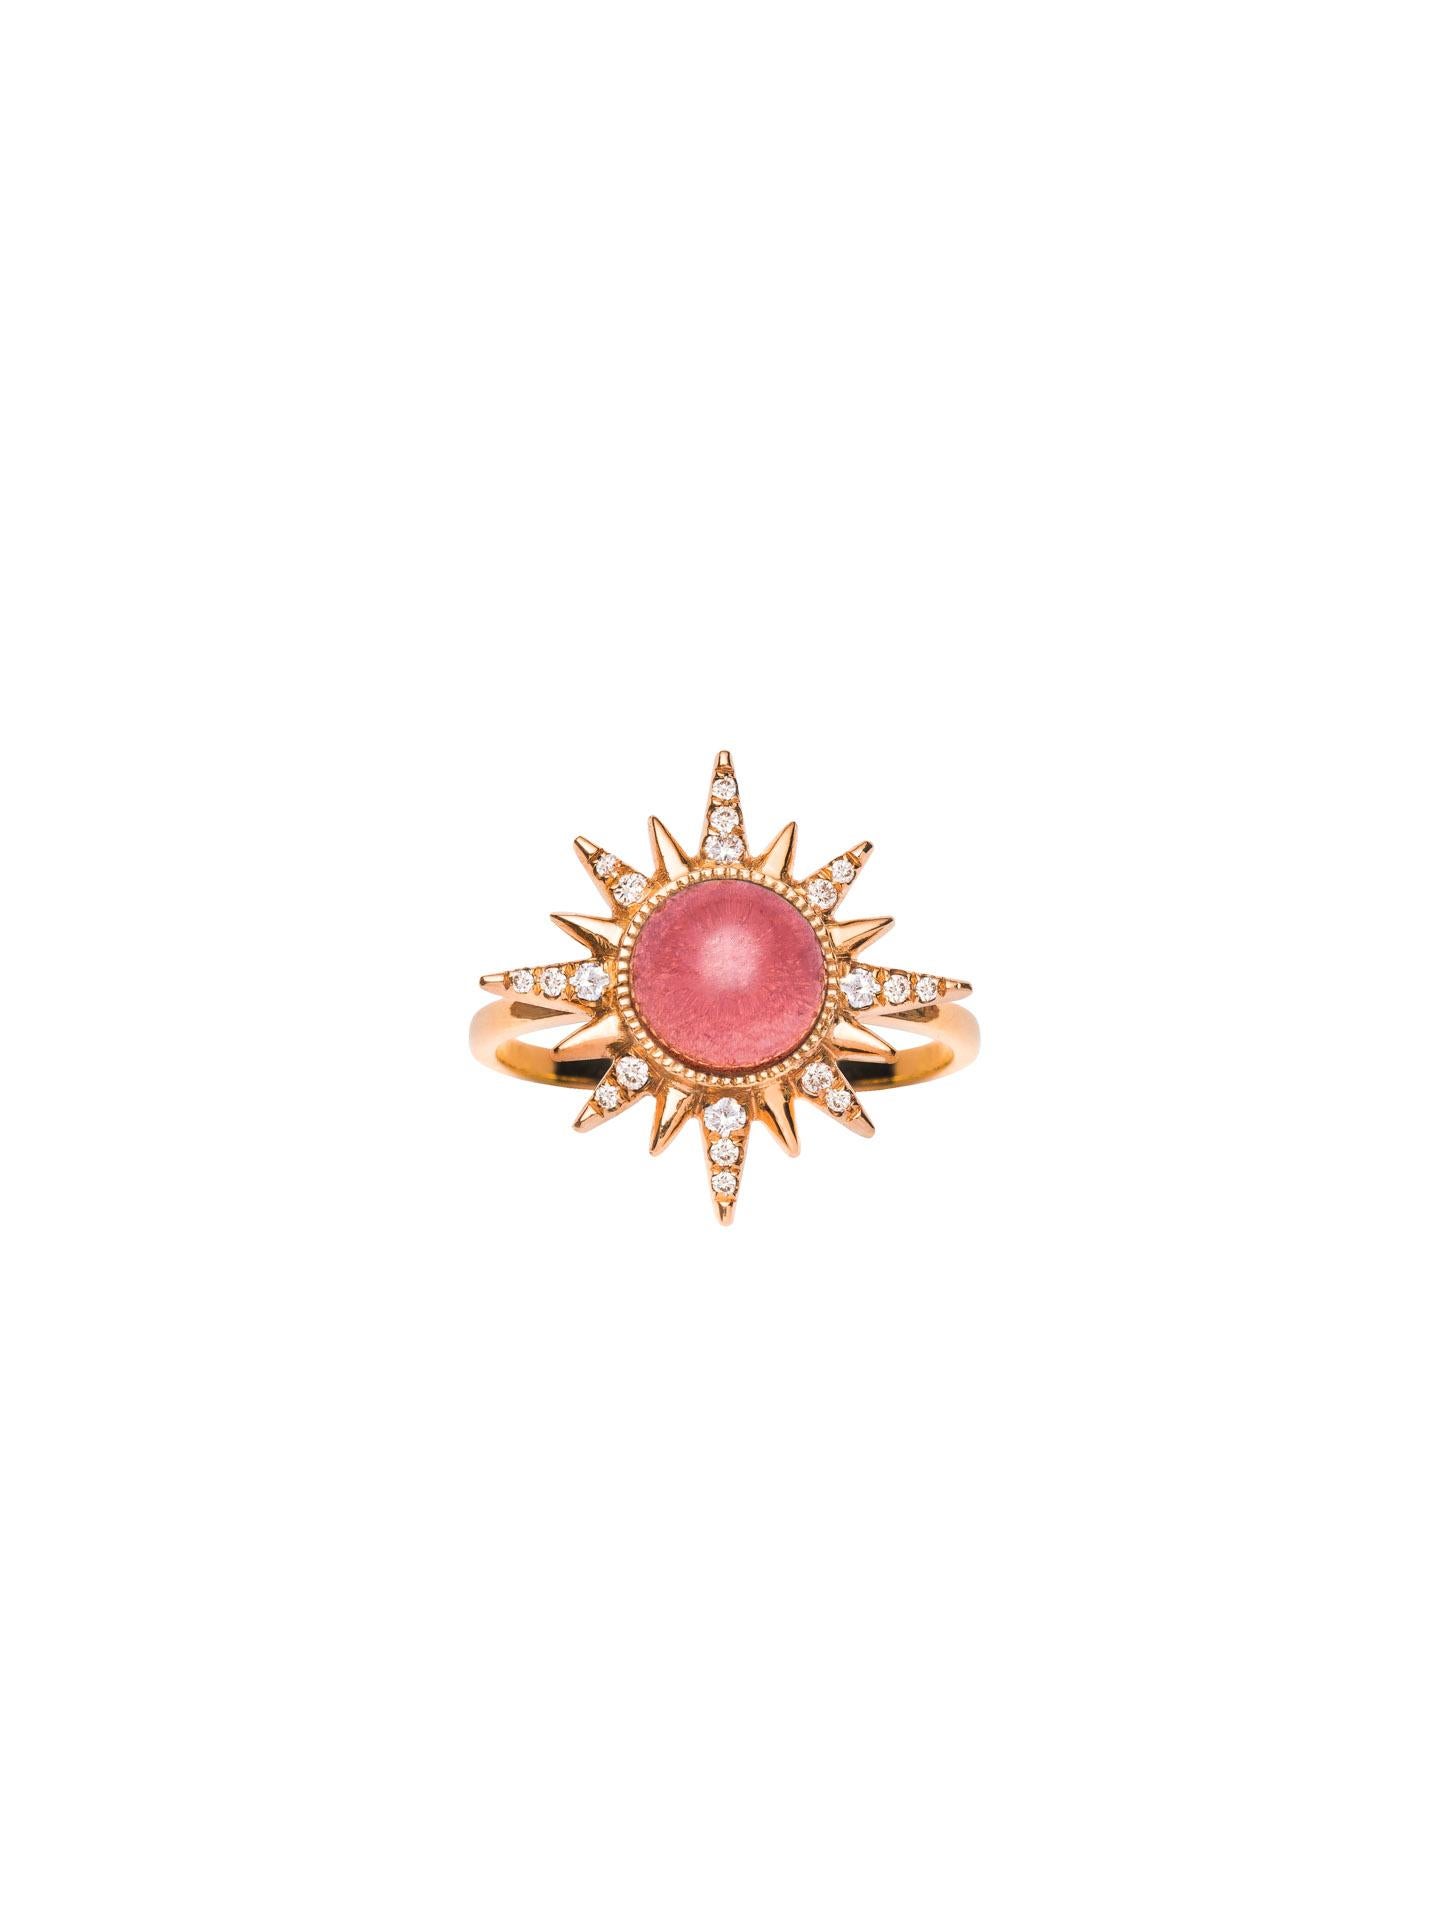 Electra Maxima Ring 

18kt rose gold, 2.11 ct Rubellite round cabochon, 0.17 ct White Diamonds, 5.25 gr total gold.
Sizes between 48 and 56.
Handmade in Italy.
*Due to Covid-19 situation, we may have delivery delays.

Item part of our Pleiadee